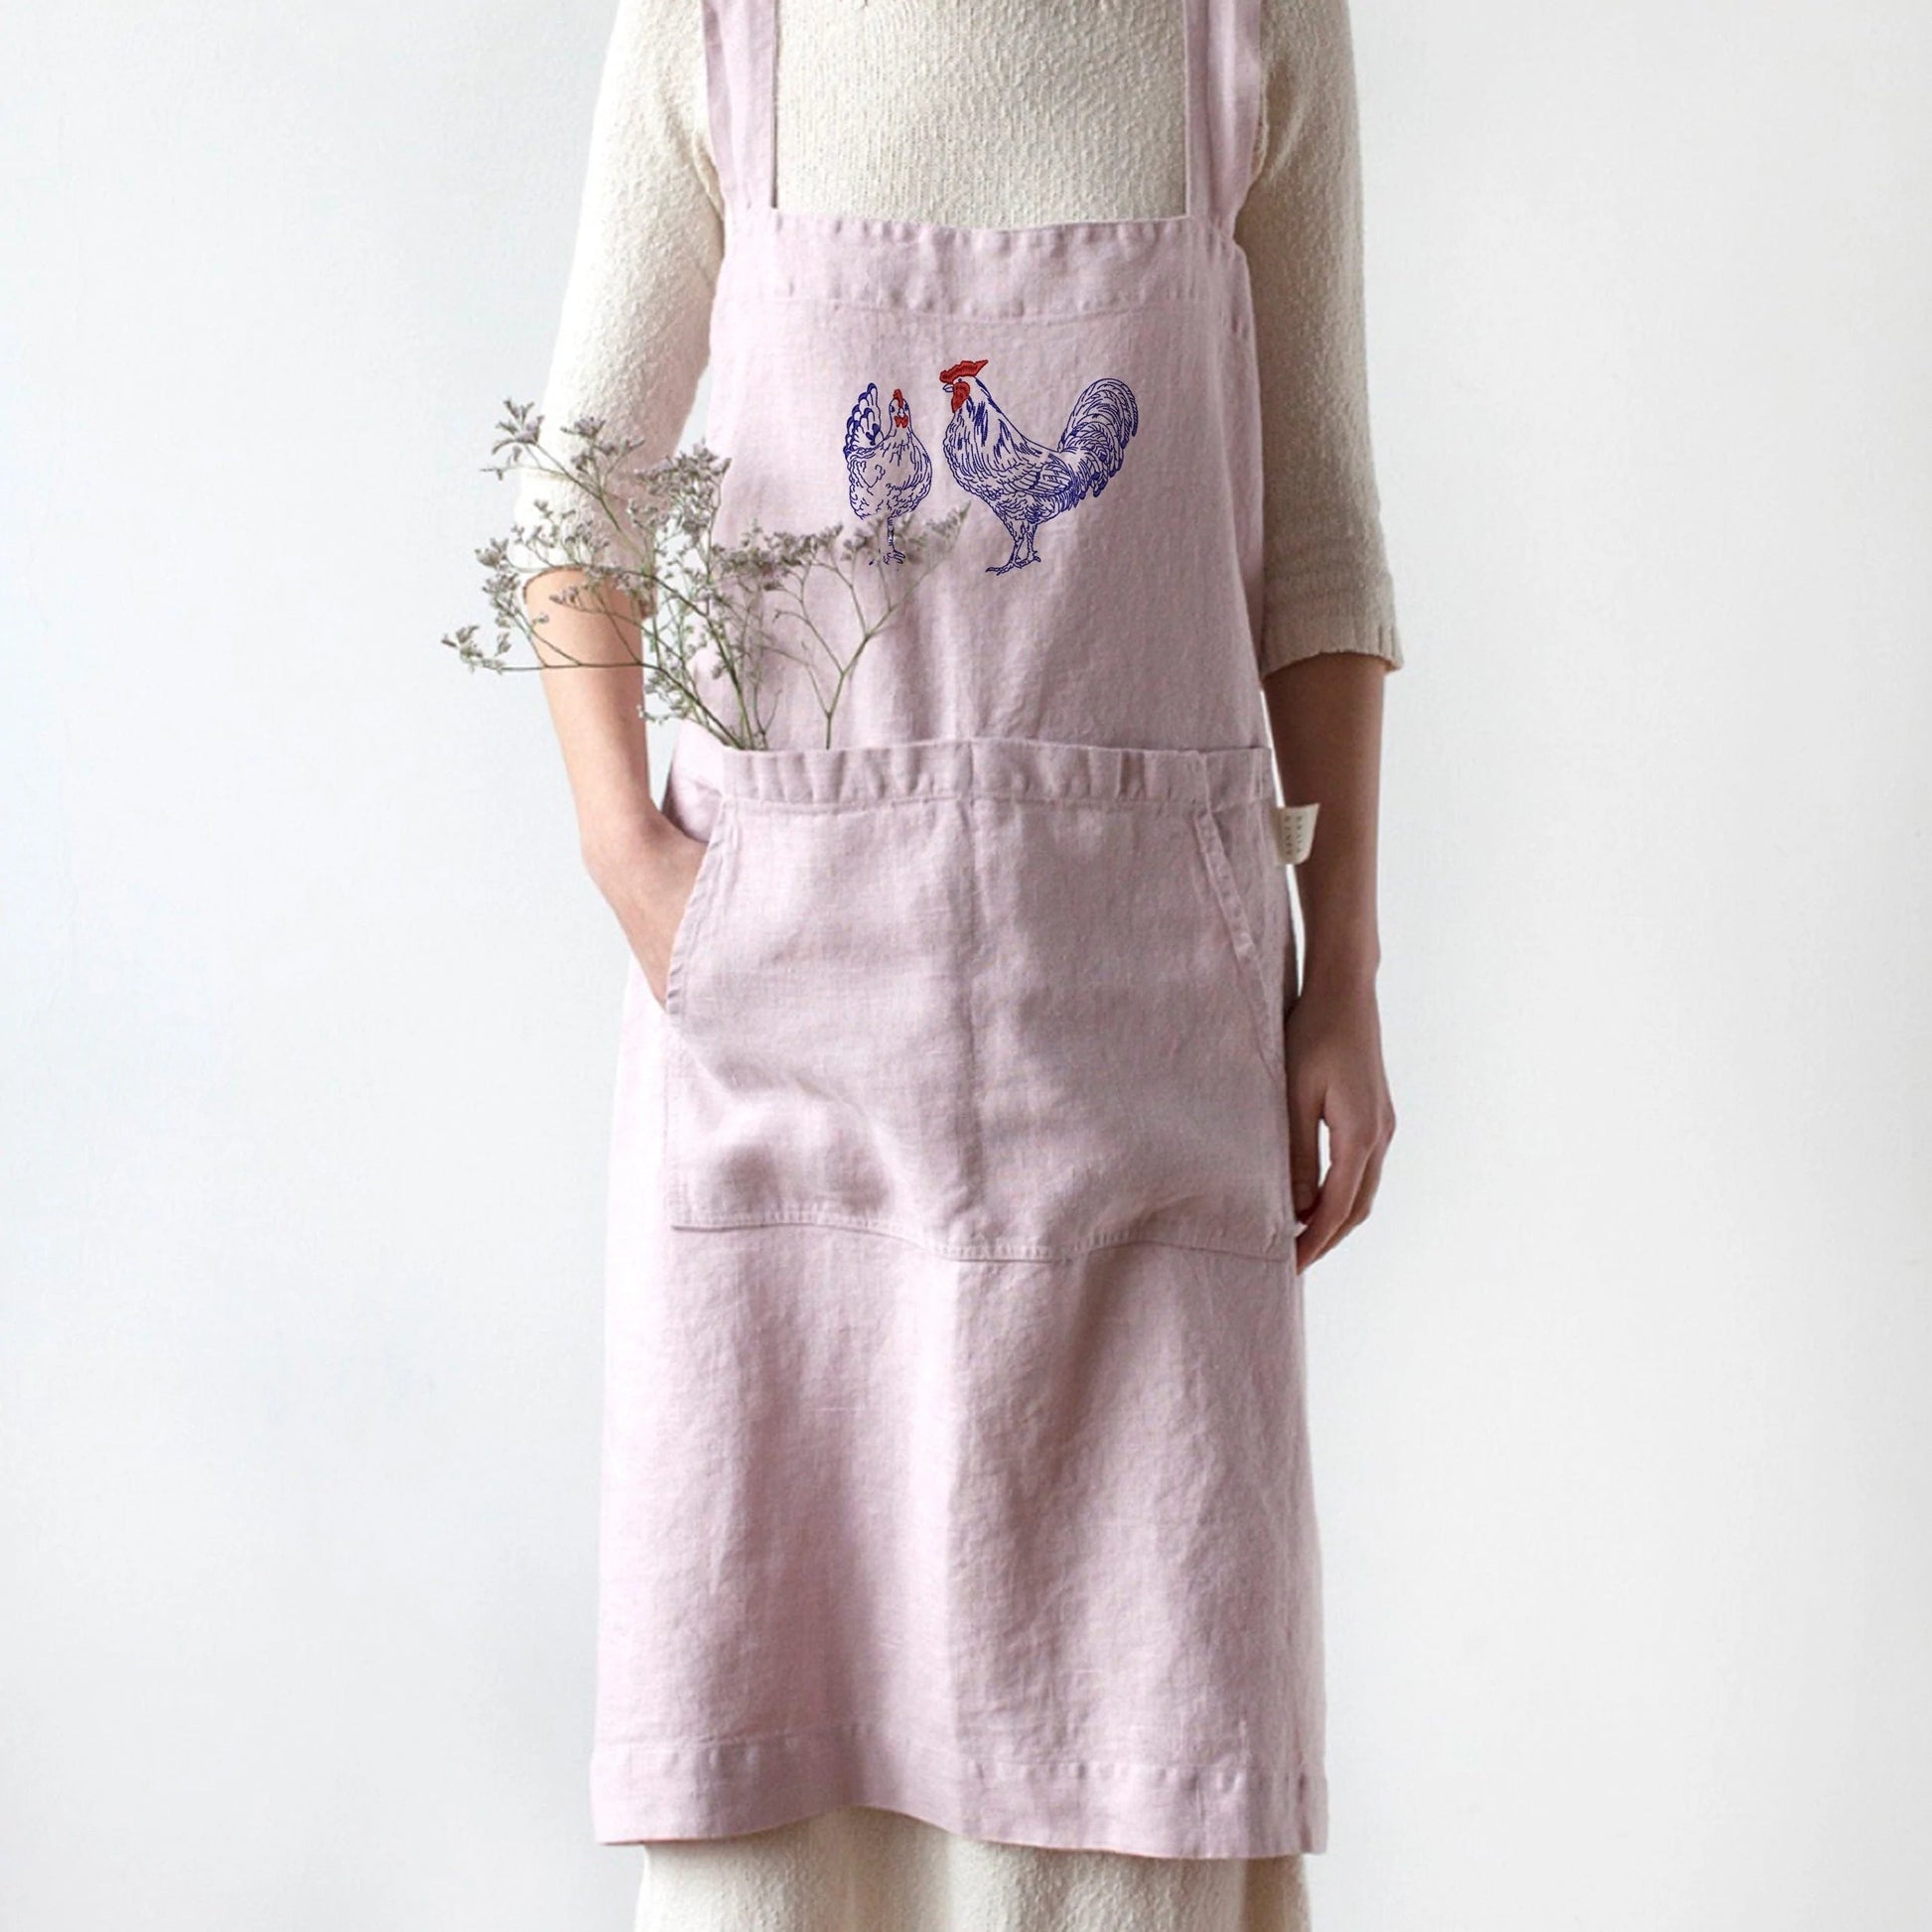 Easter Chicken and Hen Machine Embroidery Design on linen apron